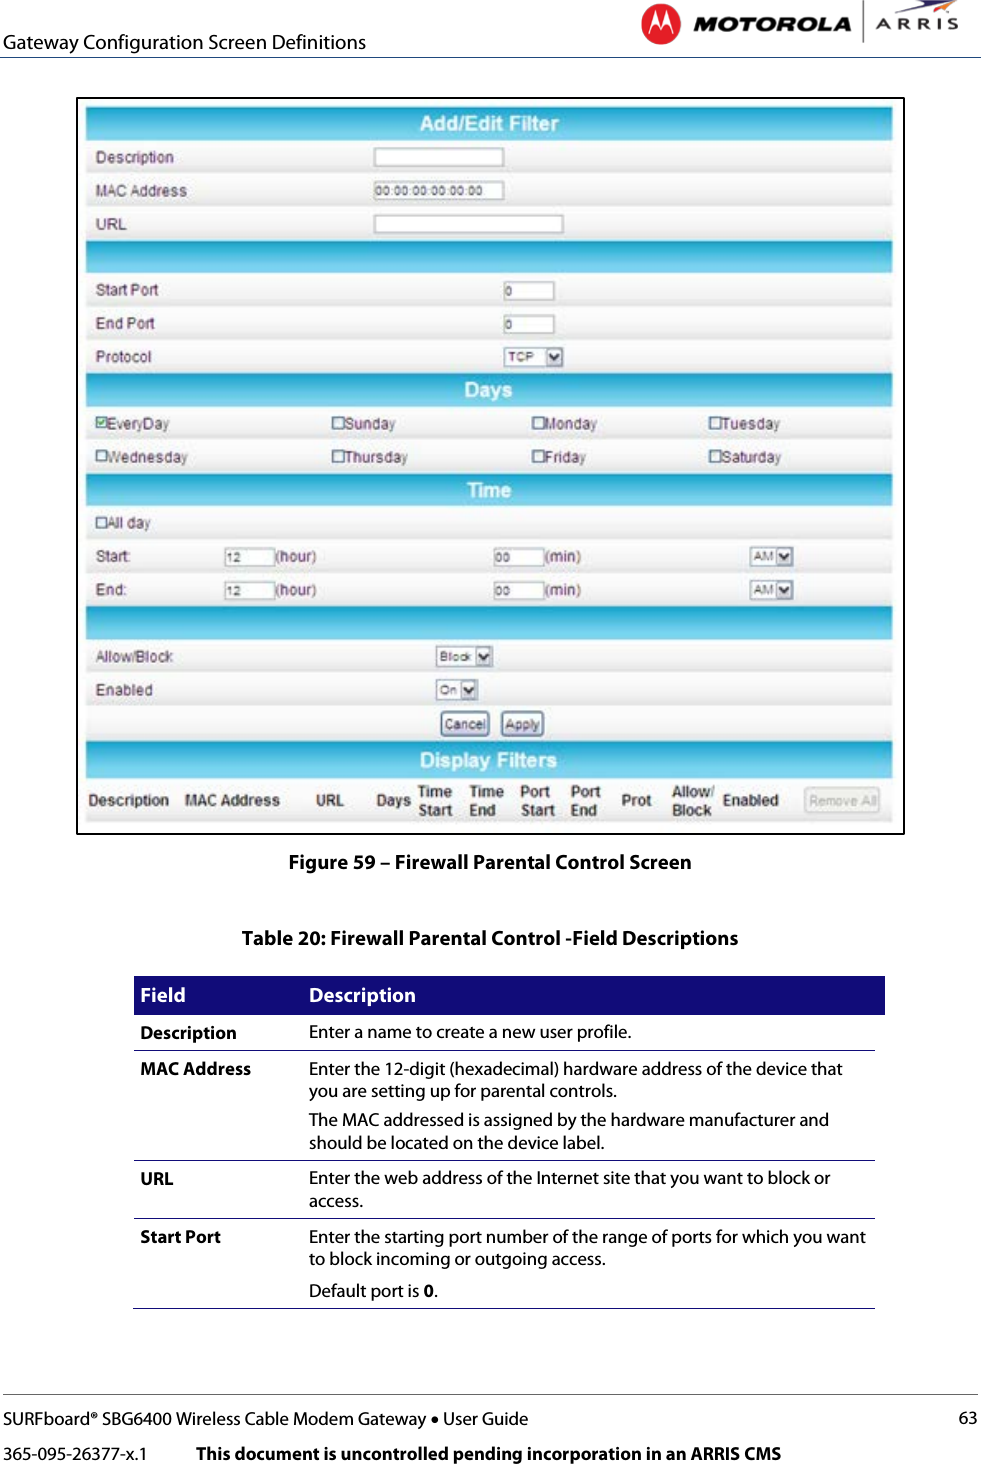 Gateway Configuration Screen Definitions   SURFboard® SBG6400 Wireless Cable Modem Gateway • User Guide 63 365-095-26377-x.1            This document is uncontrolled pending incorporation in an ARRIS CMS   Figure 59 – Firewall Parental Control Screen  Table 20: Firewall Parental Control -Field Descriptions Field Description Description Enter a name to create a new user profile. MAC Address Enter the 12-digit (hexadecimal) hardware address of the device that you are setting up for parental controls. The MAC addressed is assigned by the hardware manufacturer and should be located on the device label. URL Enter the web address of the Internet site that you want to block or access. Start Port Enter the starting port number of the range of ports for which you want to block incoming or outgoing access. Default port is 0. 